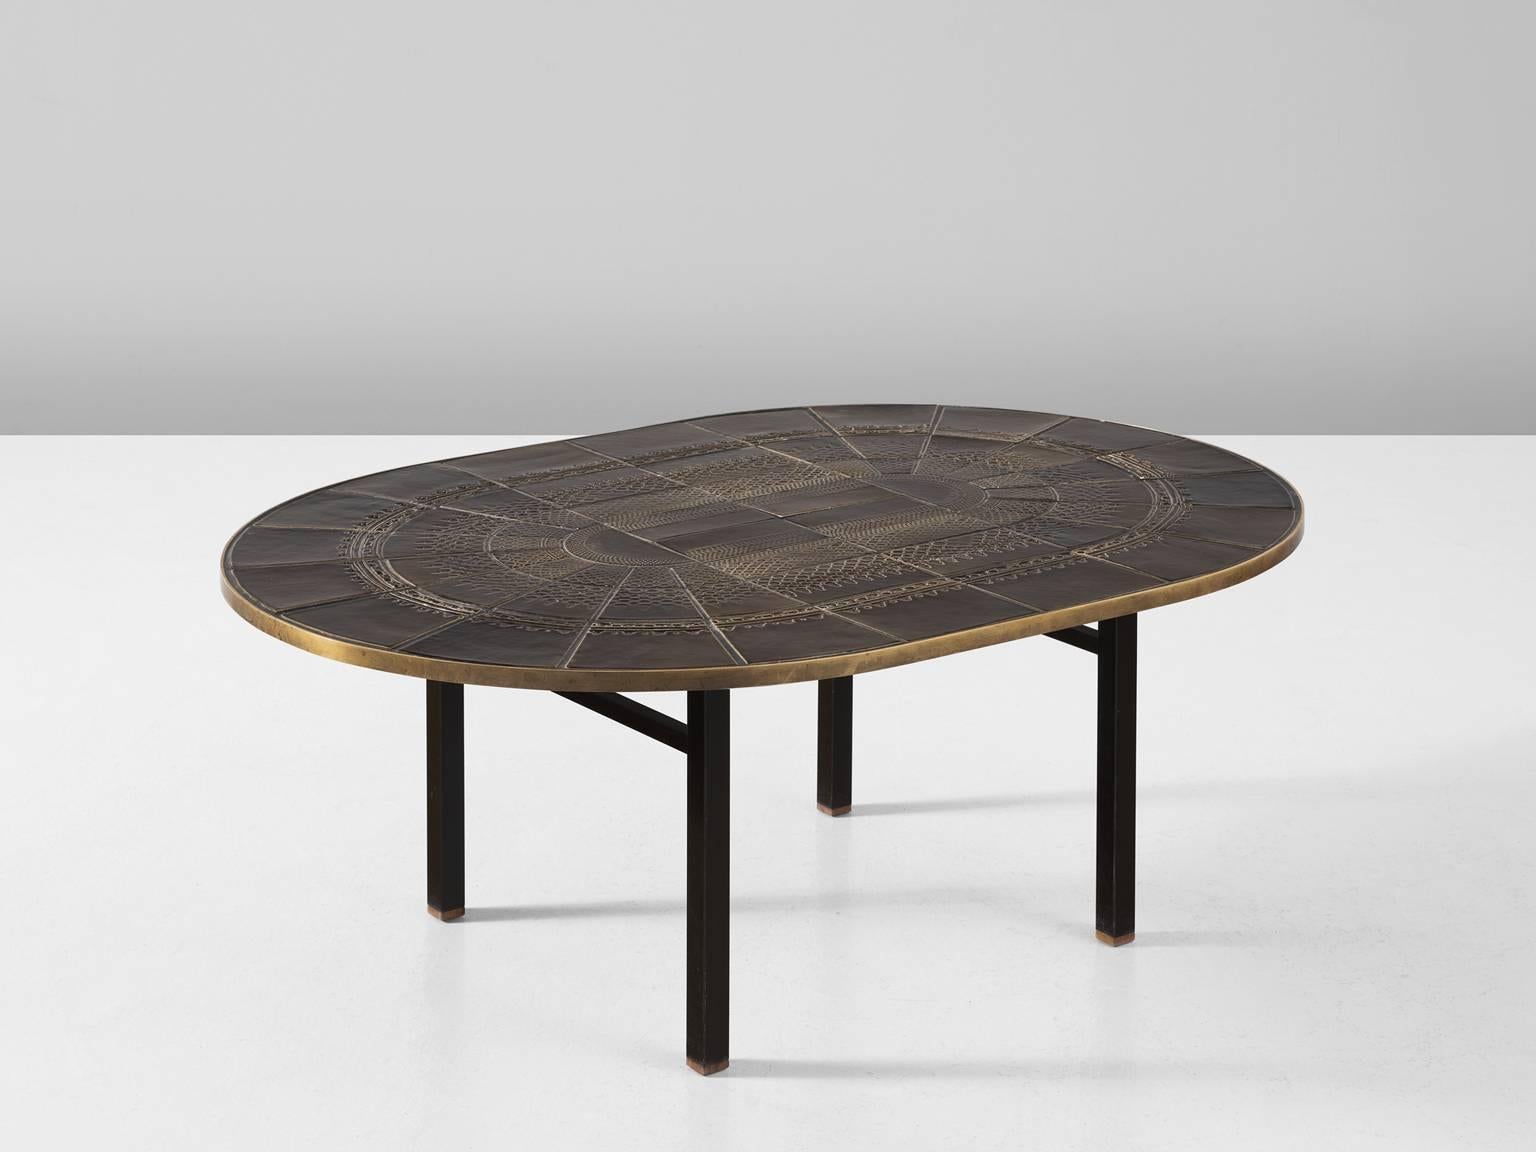 Coffee table in ceramic, metal and brass, Scandinavia, 1950s.

Beautifully detailed oval coffee table with ceramic tiles top. The frame is made of black coated metal to carry the heavy top. This oval shaped top is made of brown glazed ceramic